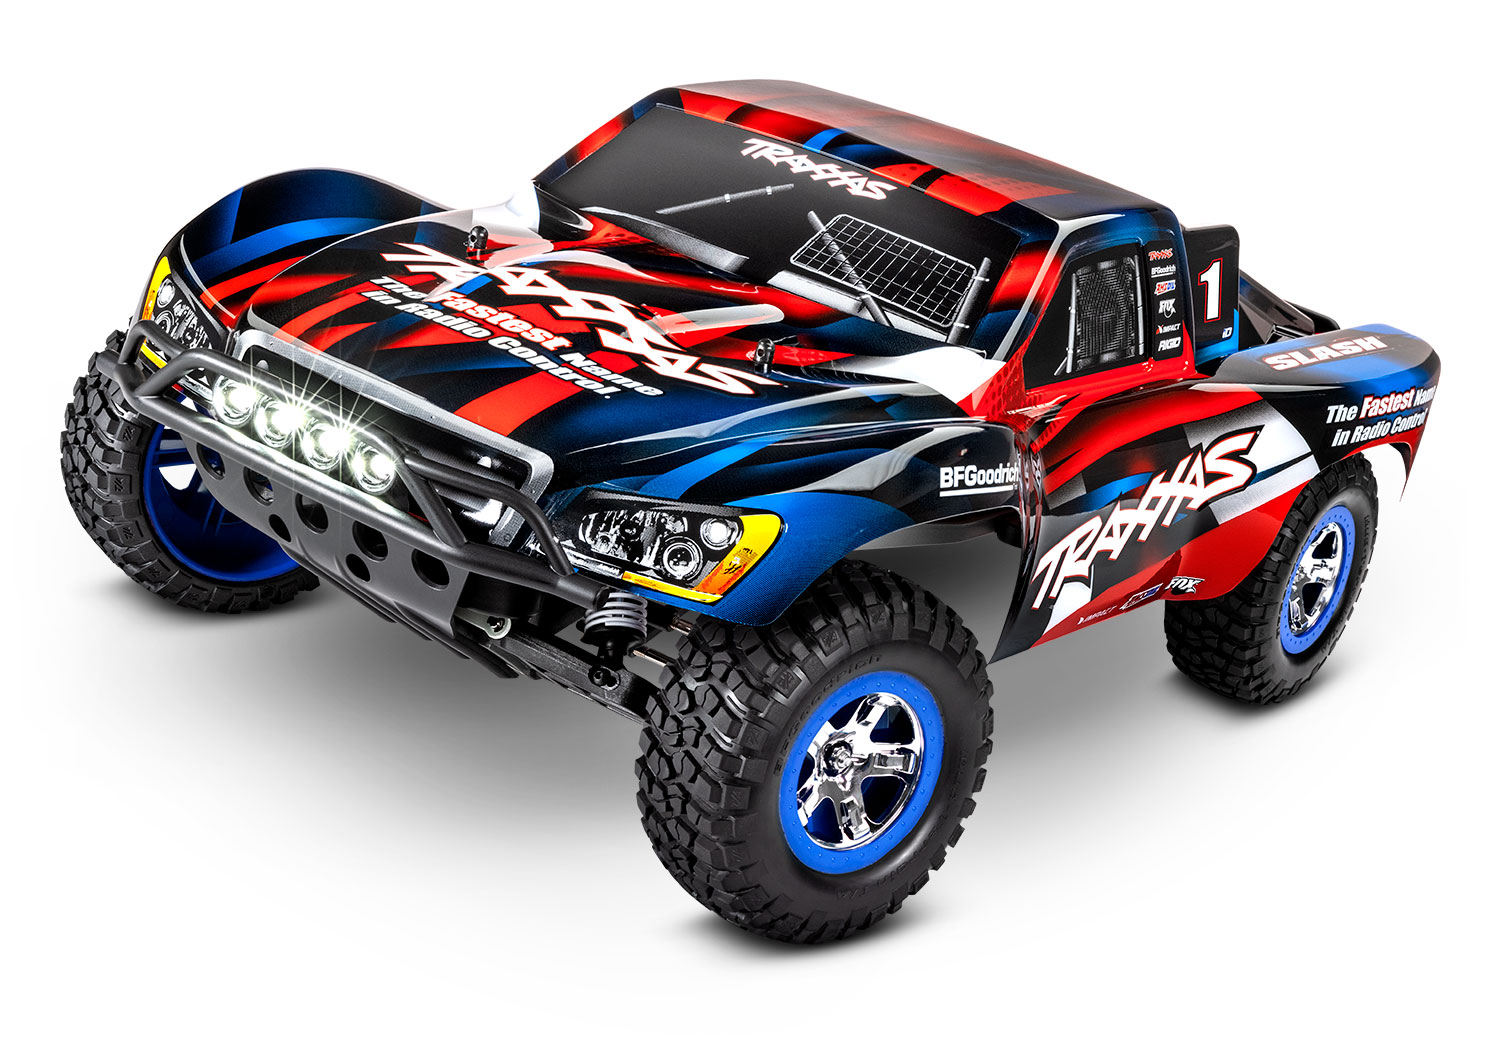 Traxxas Slash XL5 2WD short course truck RTR 2.4Ghz met LED verlichting inclusief Power Pack - Rood/Blauw